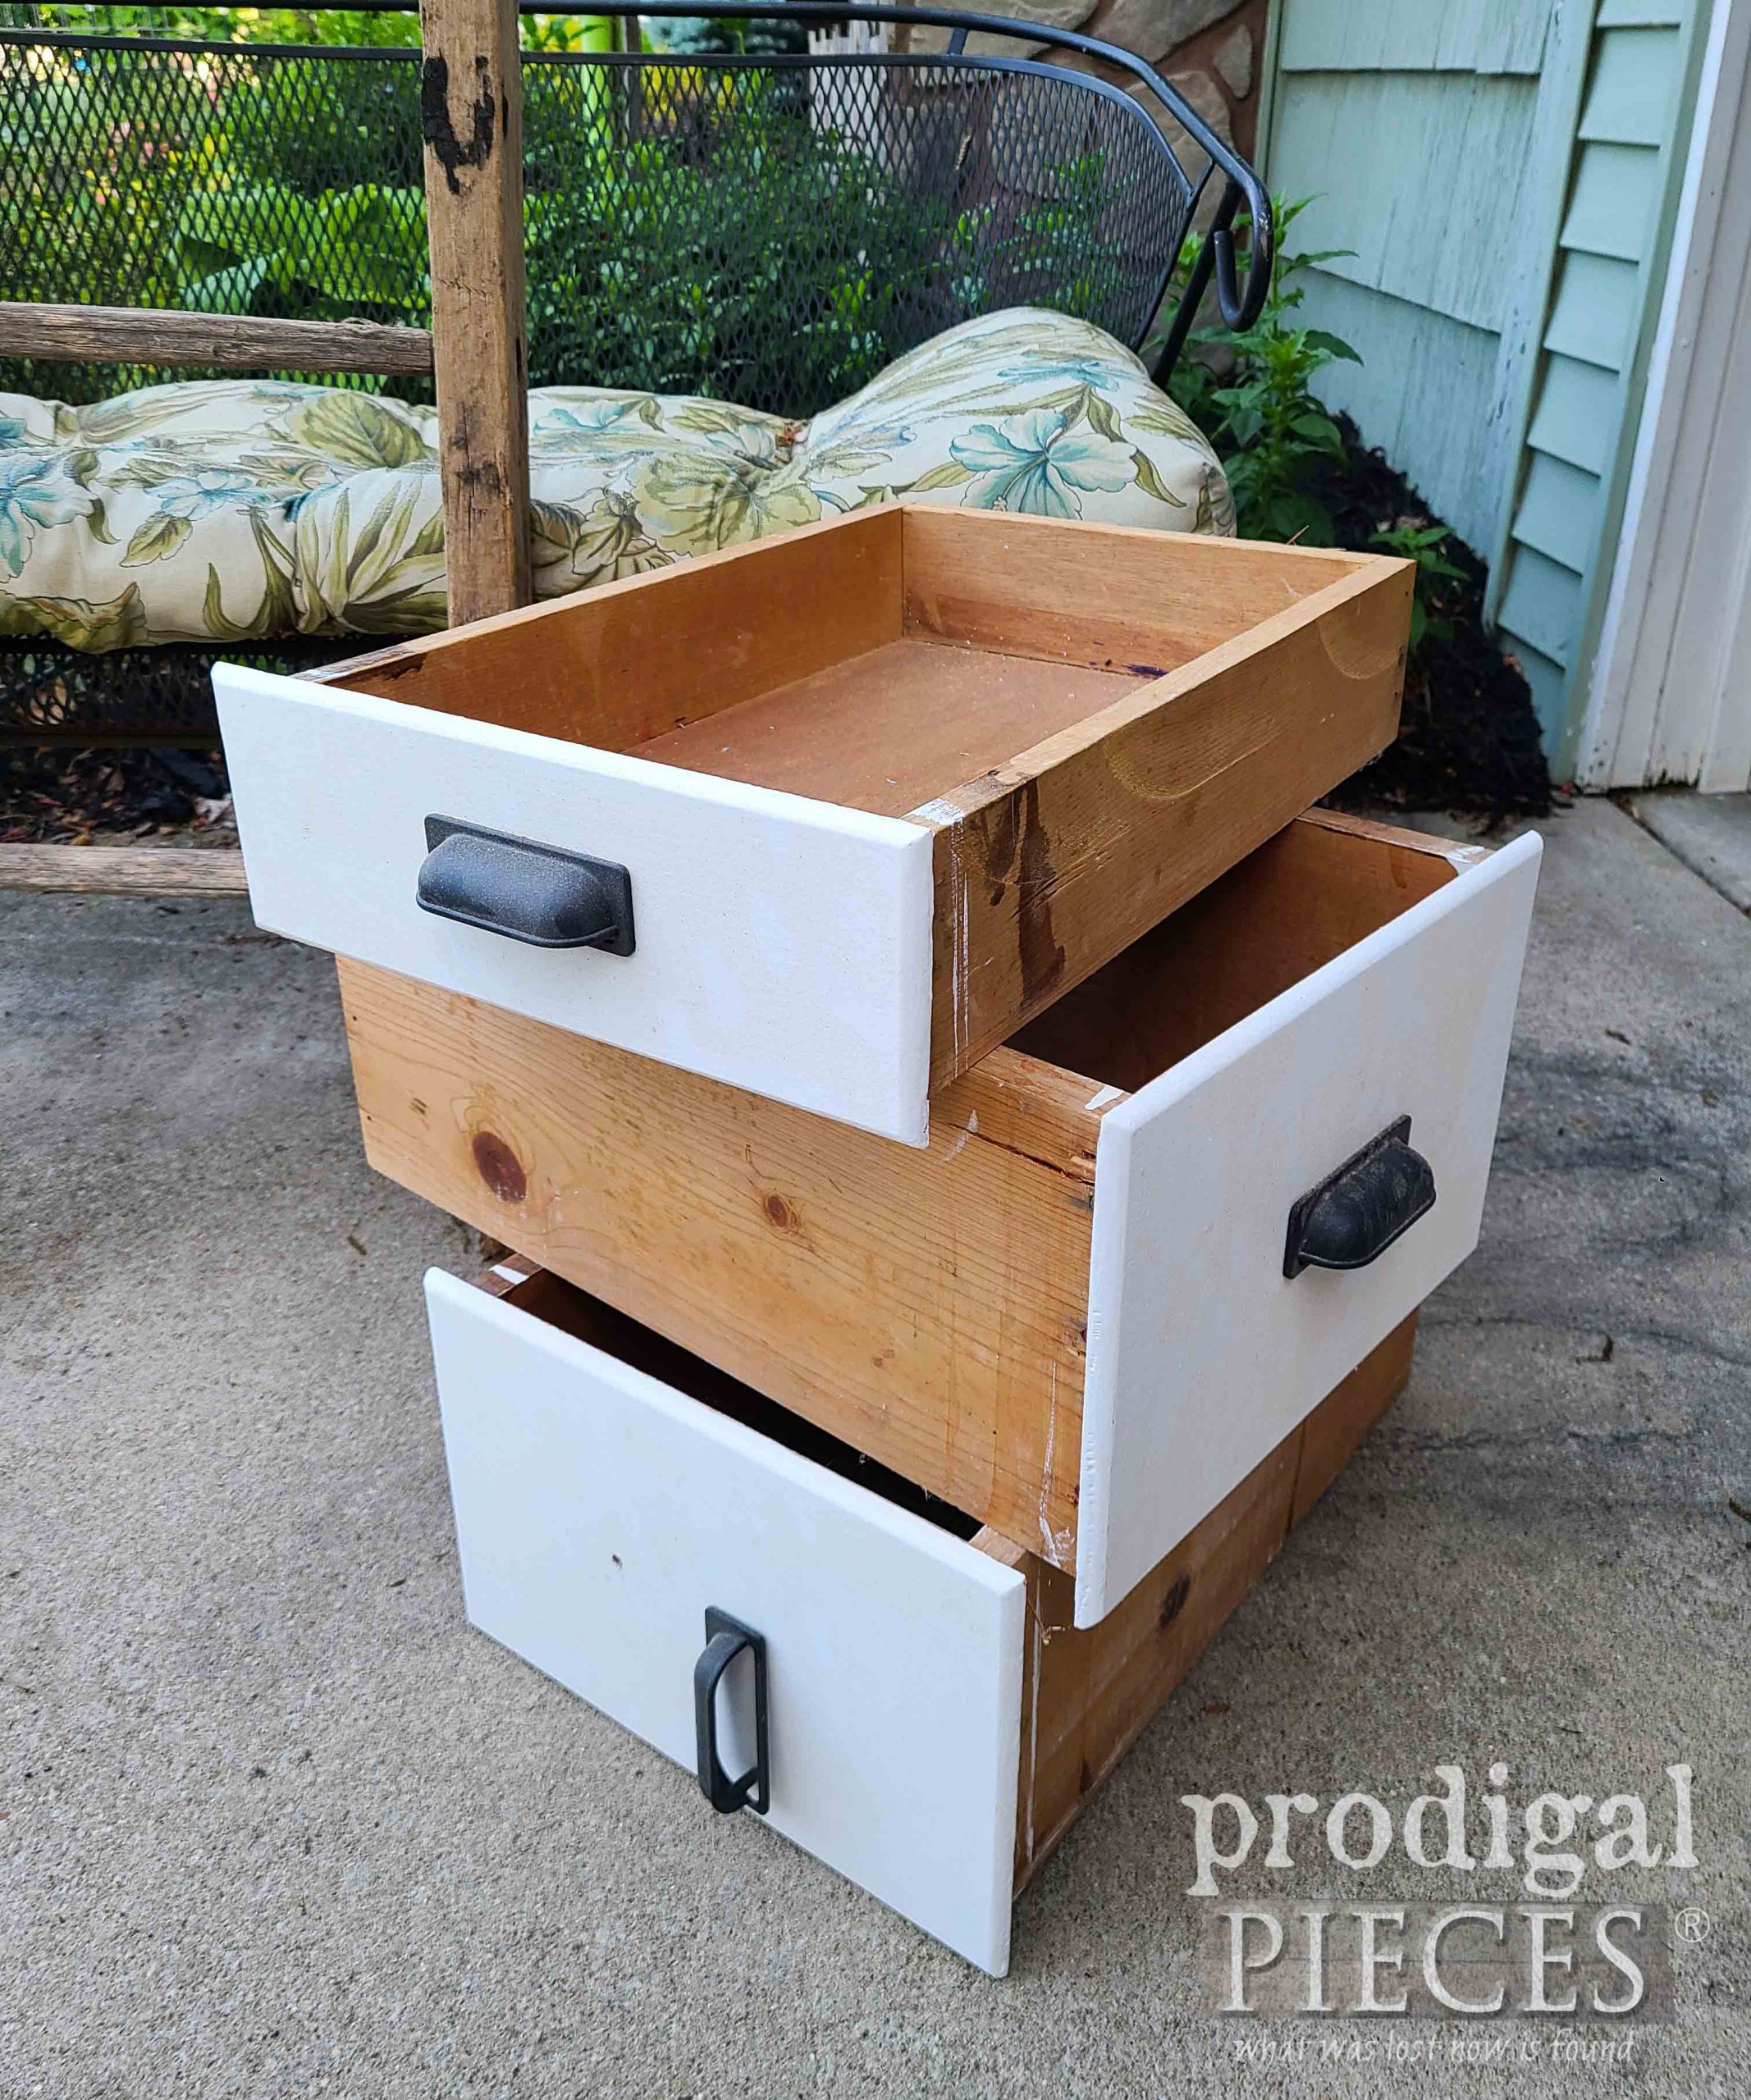 Stacked Misfit Drawers Before Upcycle | prodigalpieces.com